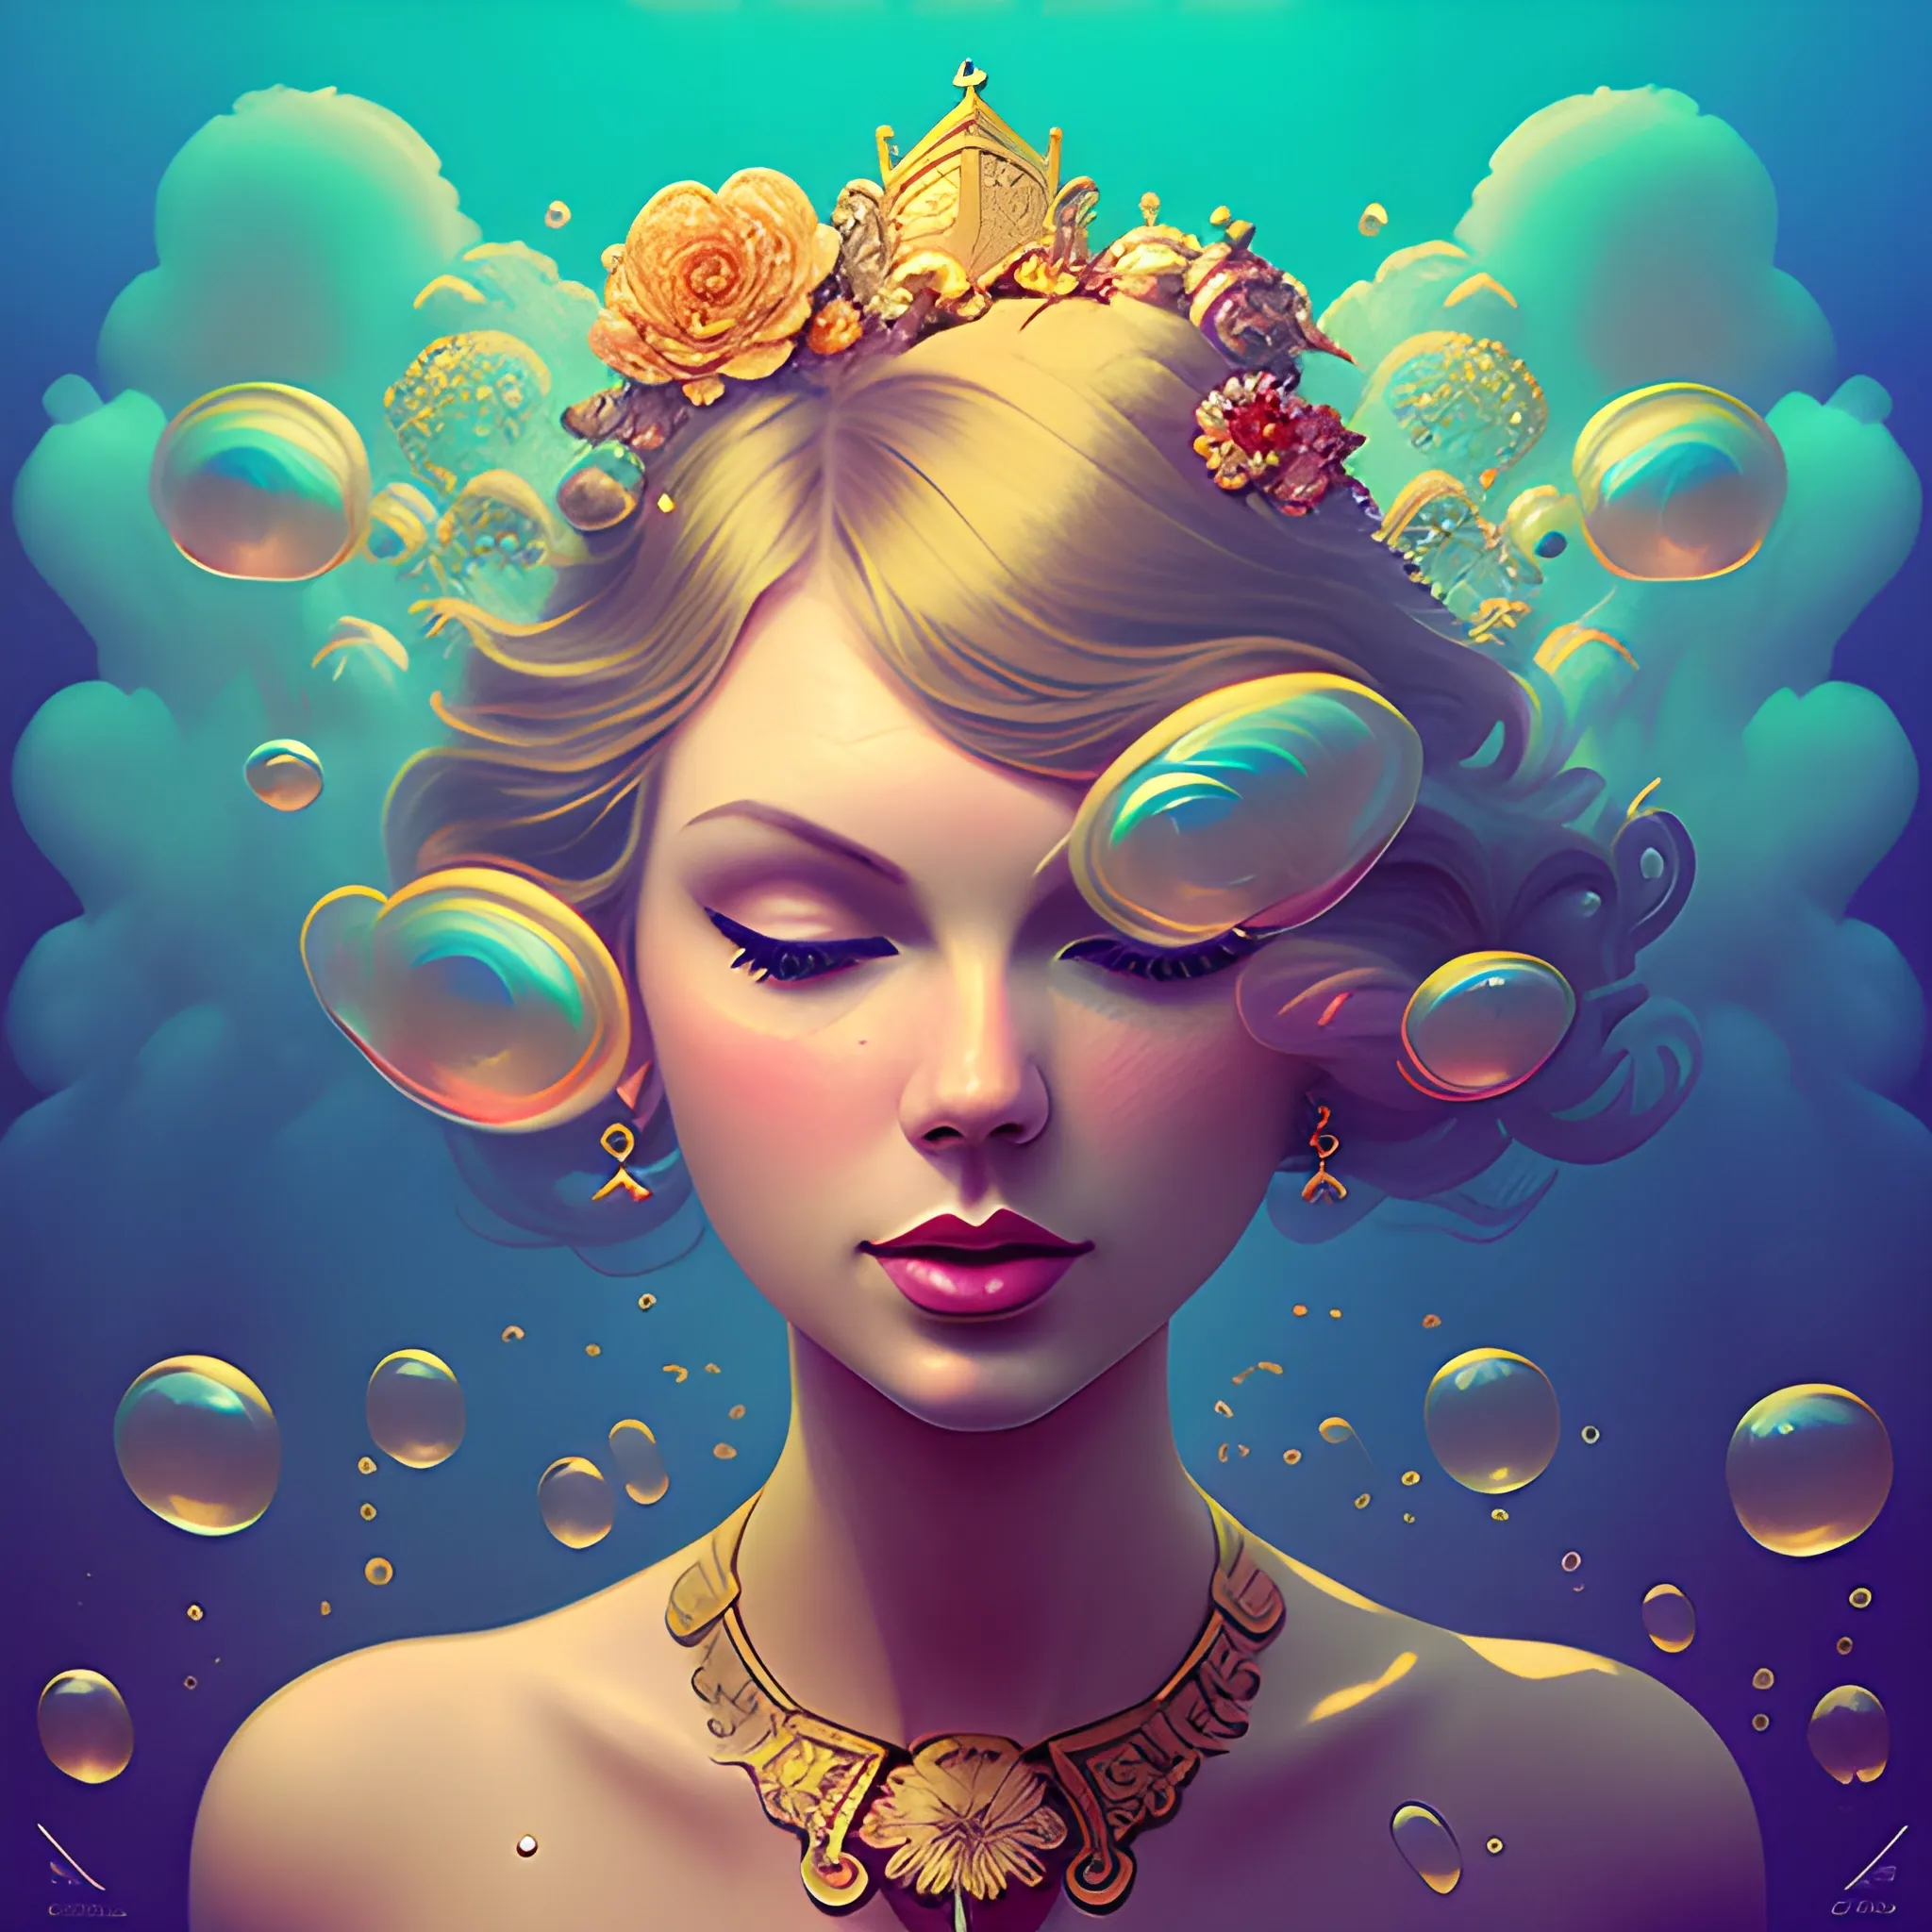 Flowery beautiful face like Taylor swift with gold jewellery, by petros afshar, ross tran, Tom Bagshaw, tom whalen, underwater bubbly psychedelic clouds, Anaglyph 3D lens blur effect